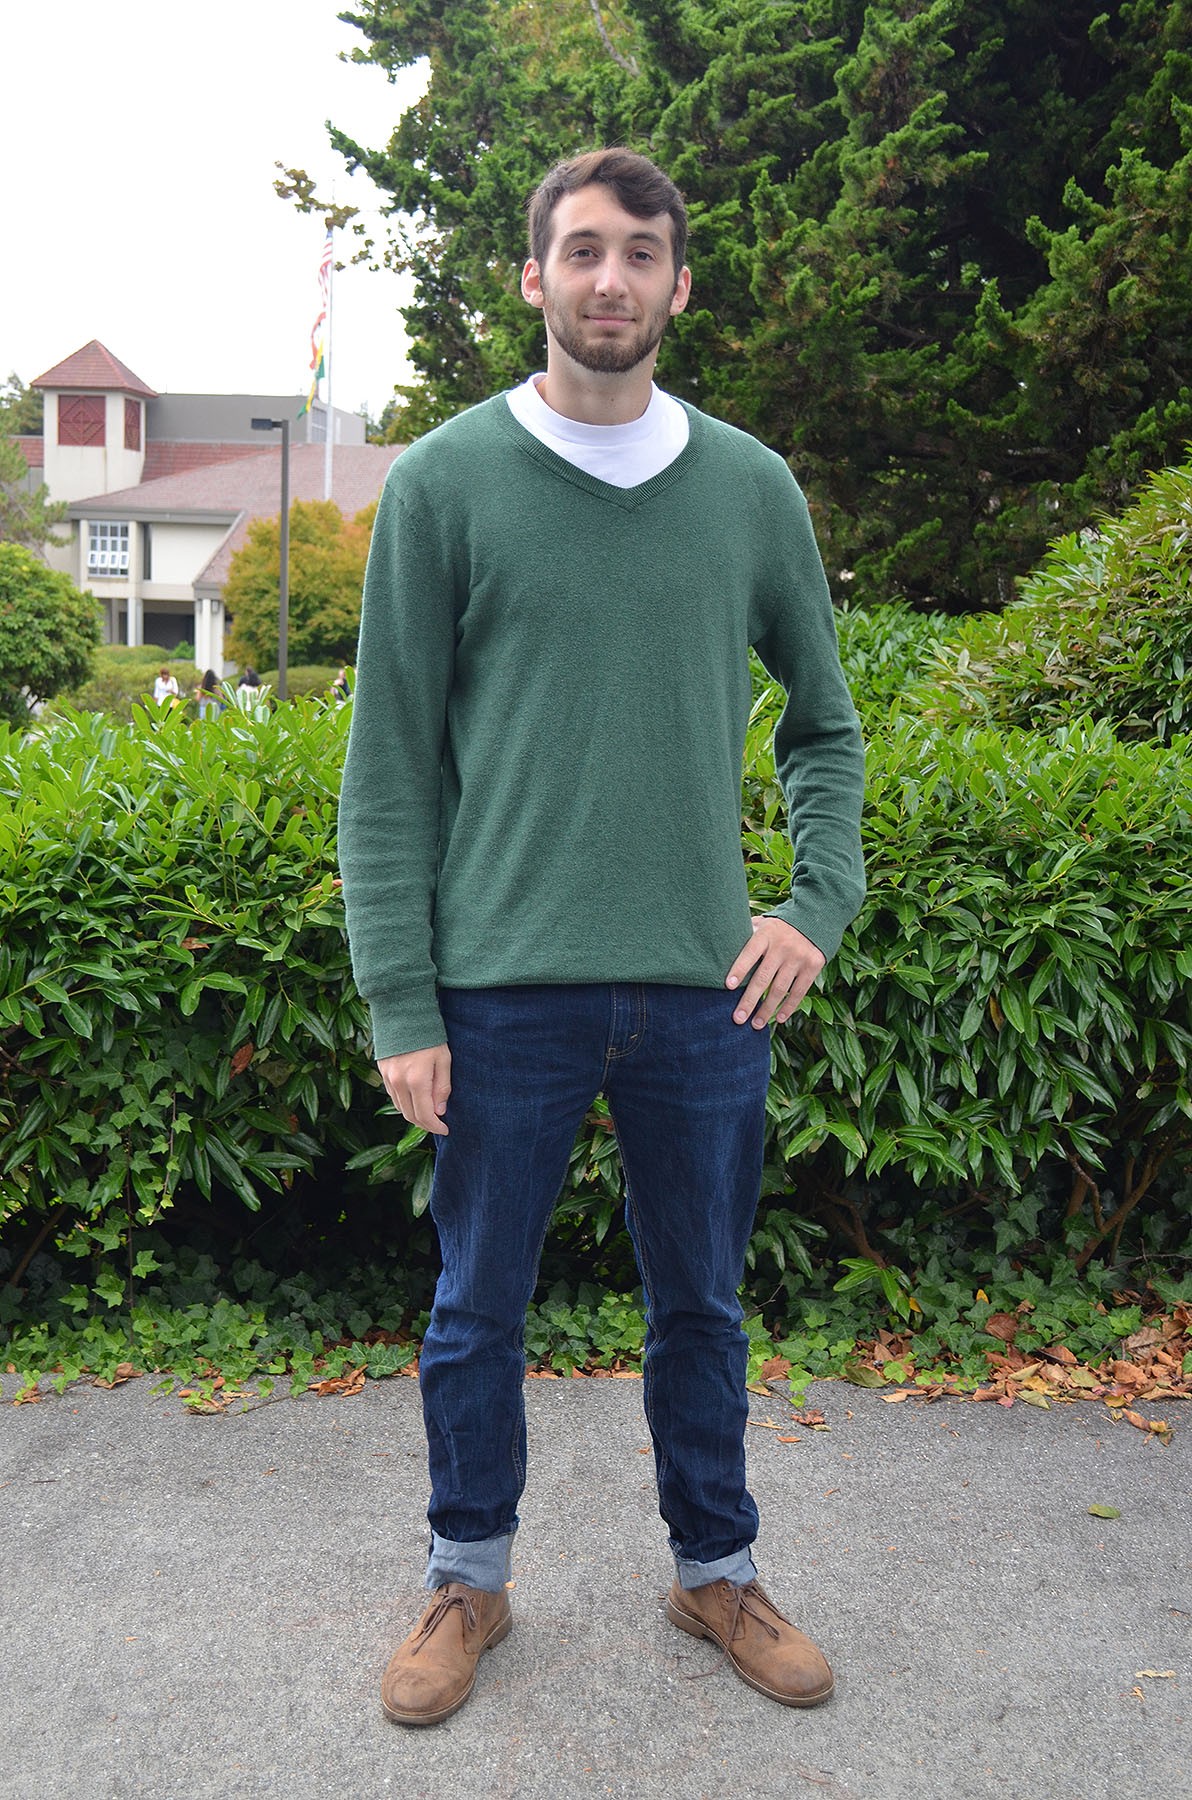 Junior Ian Fitzgerald is studying business administration and wearing the classics: Levi's, Clarks and a Gap sweater. - PHOTO BY SHARON RUCHTE